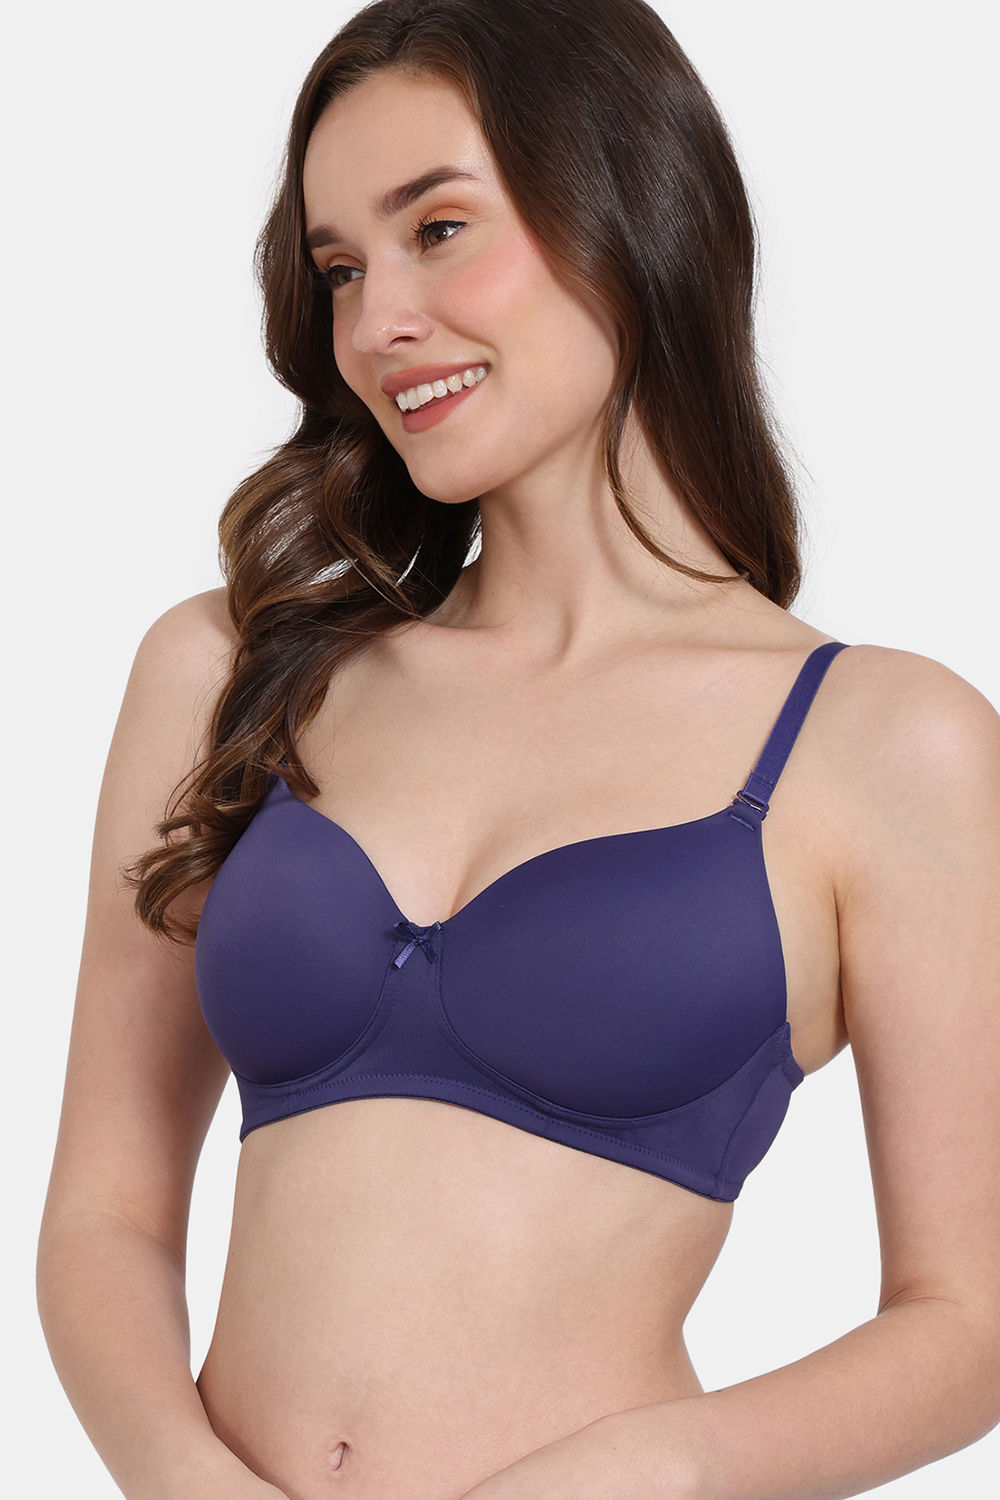 Susa 8139-343 Sapphire Blue Embroidered Padded Non-Wired Soft Bra